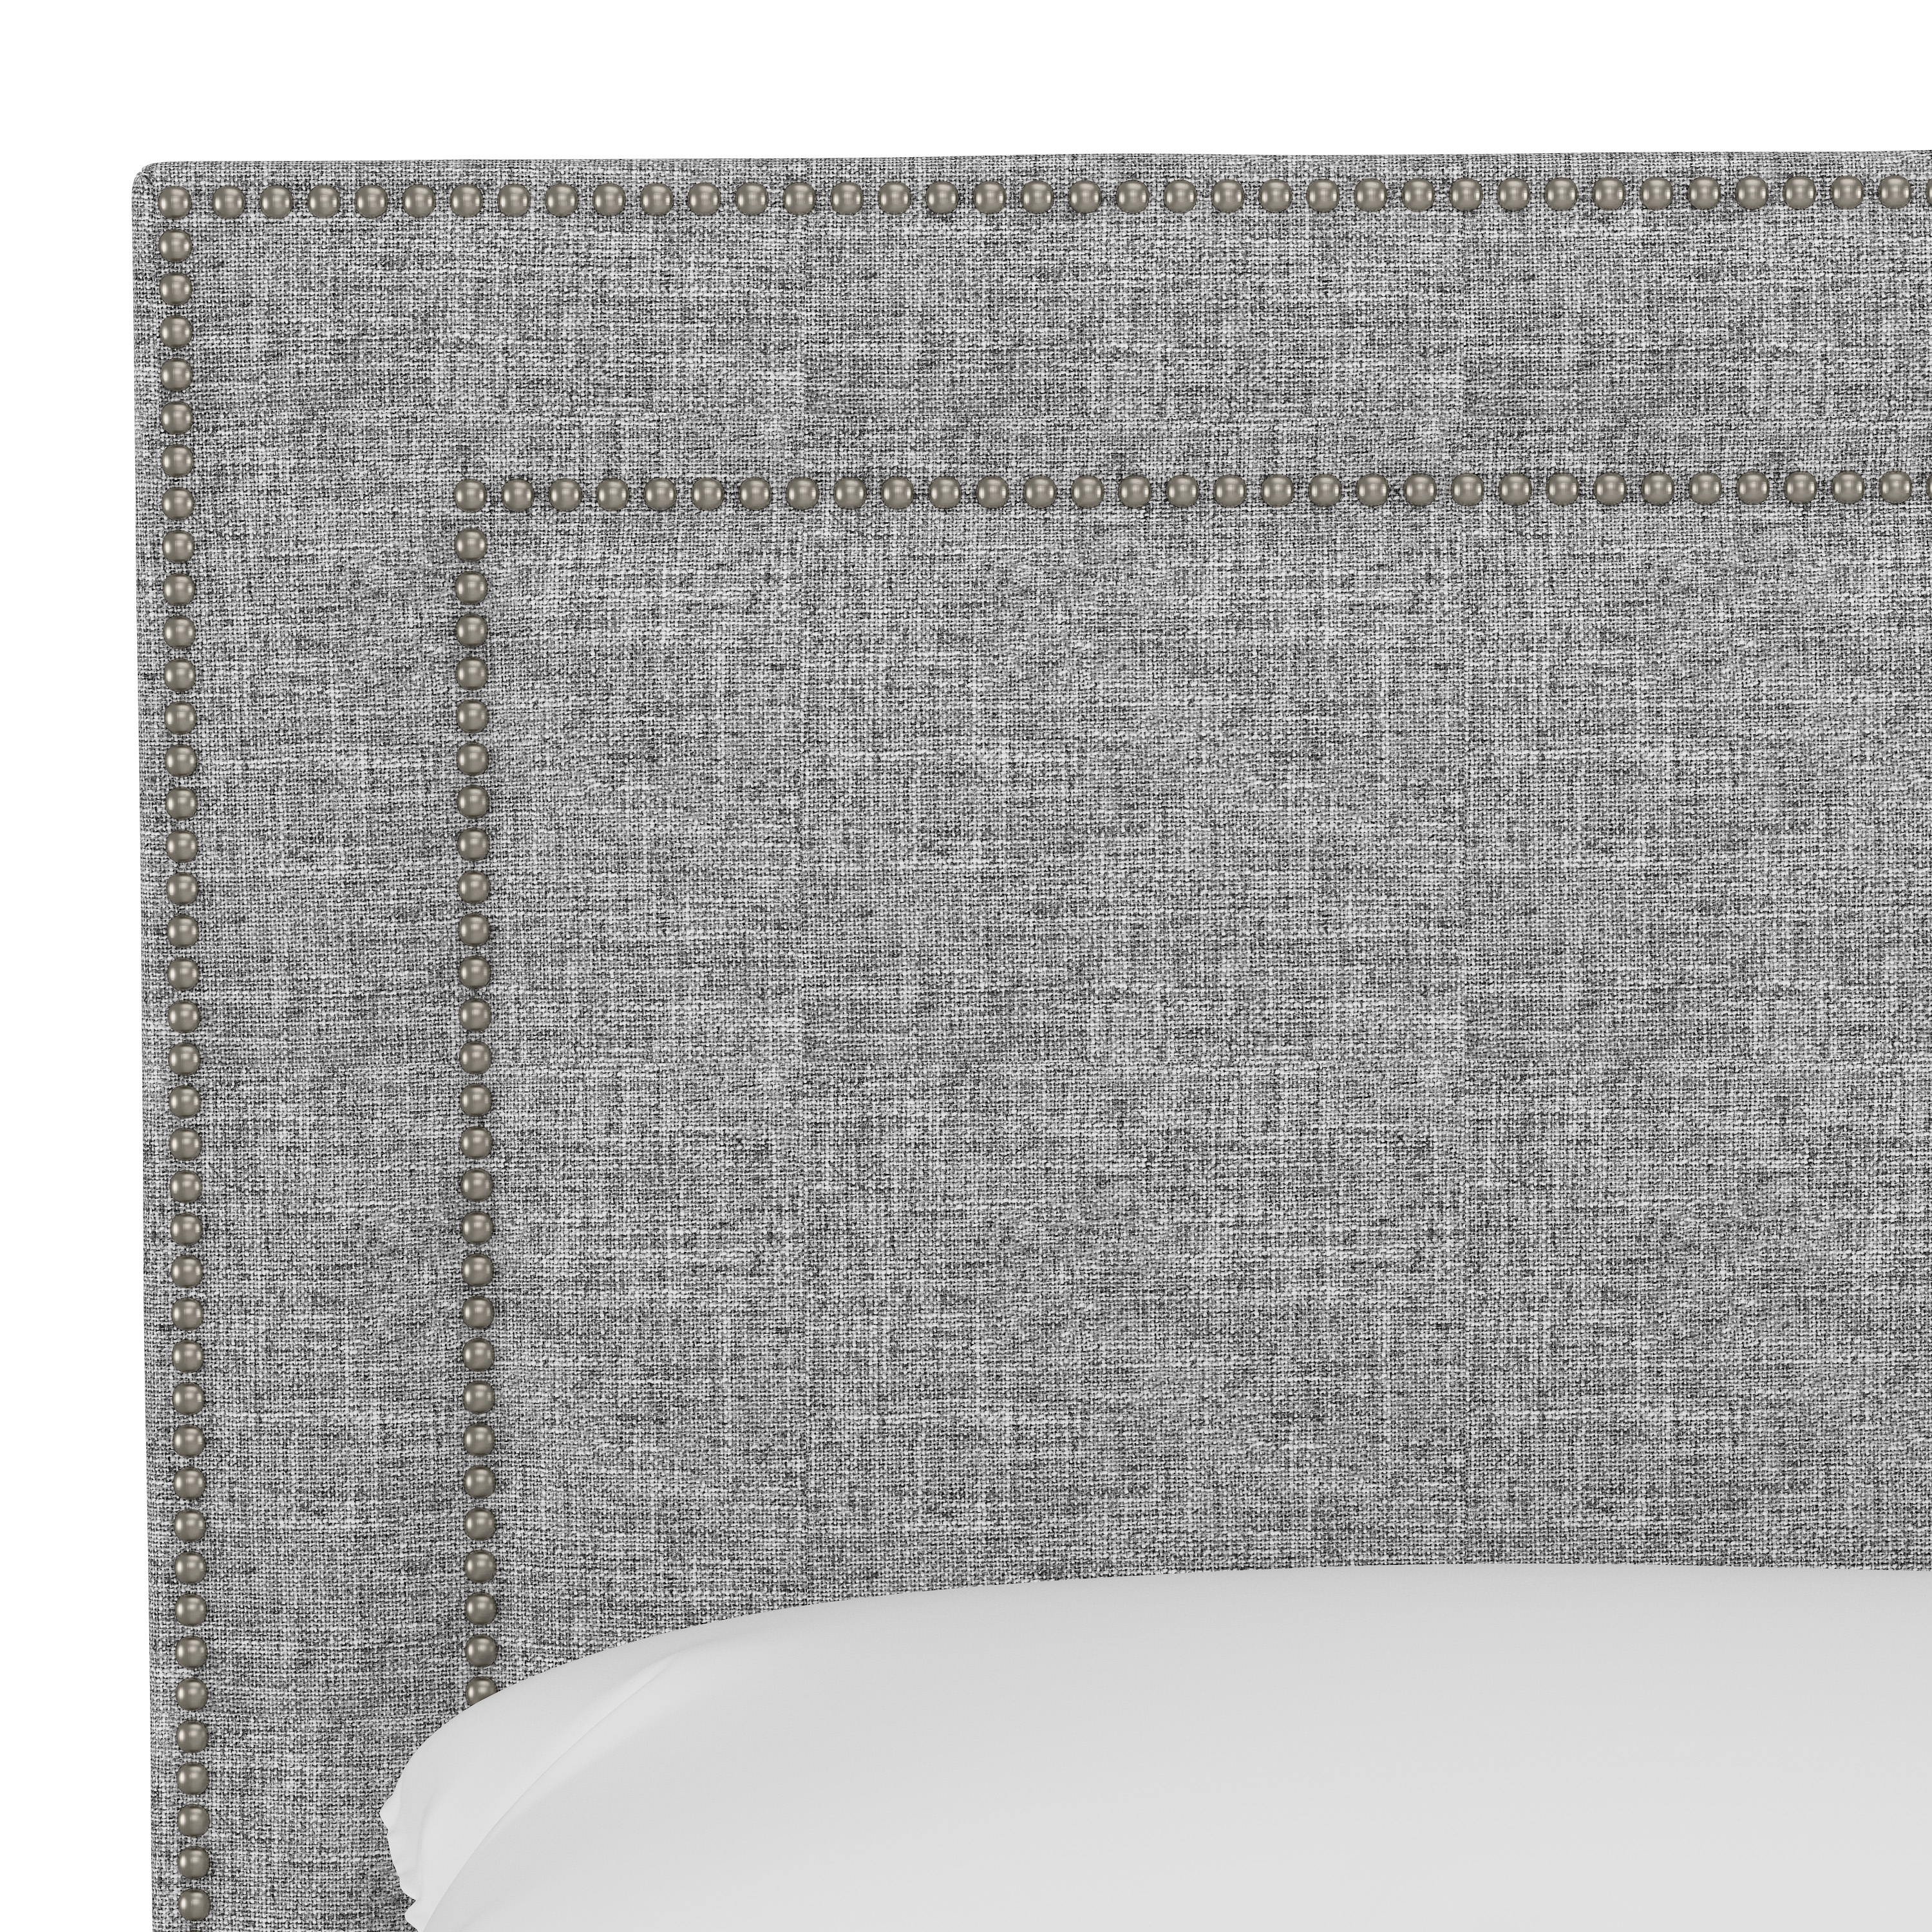 Williams Bed, Twin, Pumice, Pewter Nailheads - Image 3